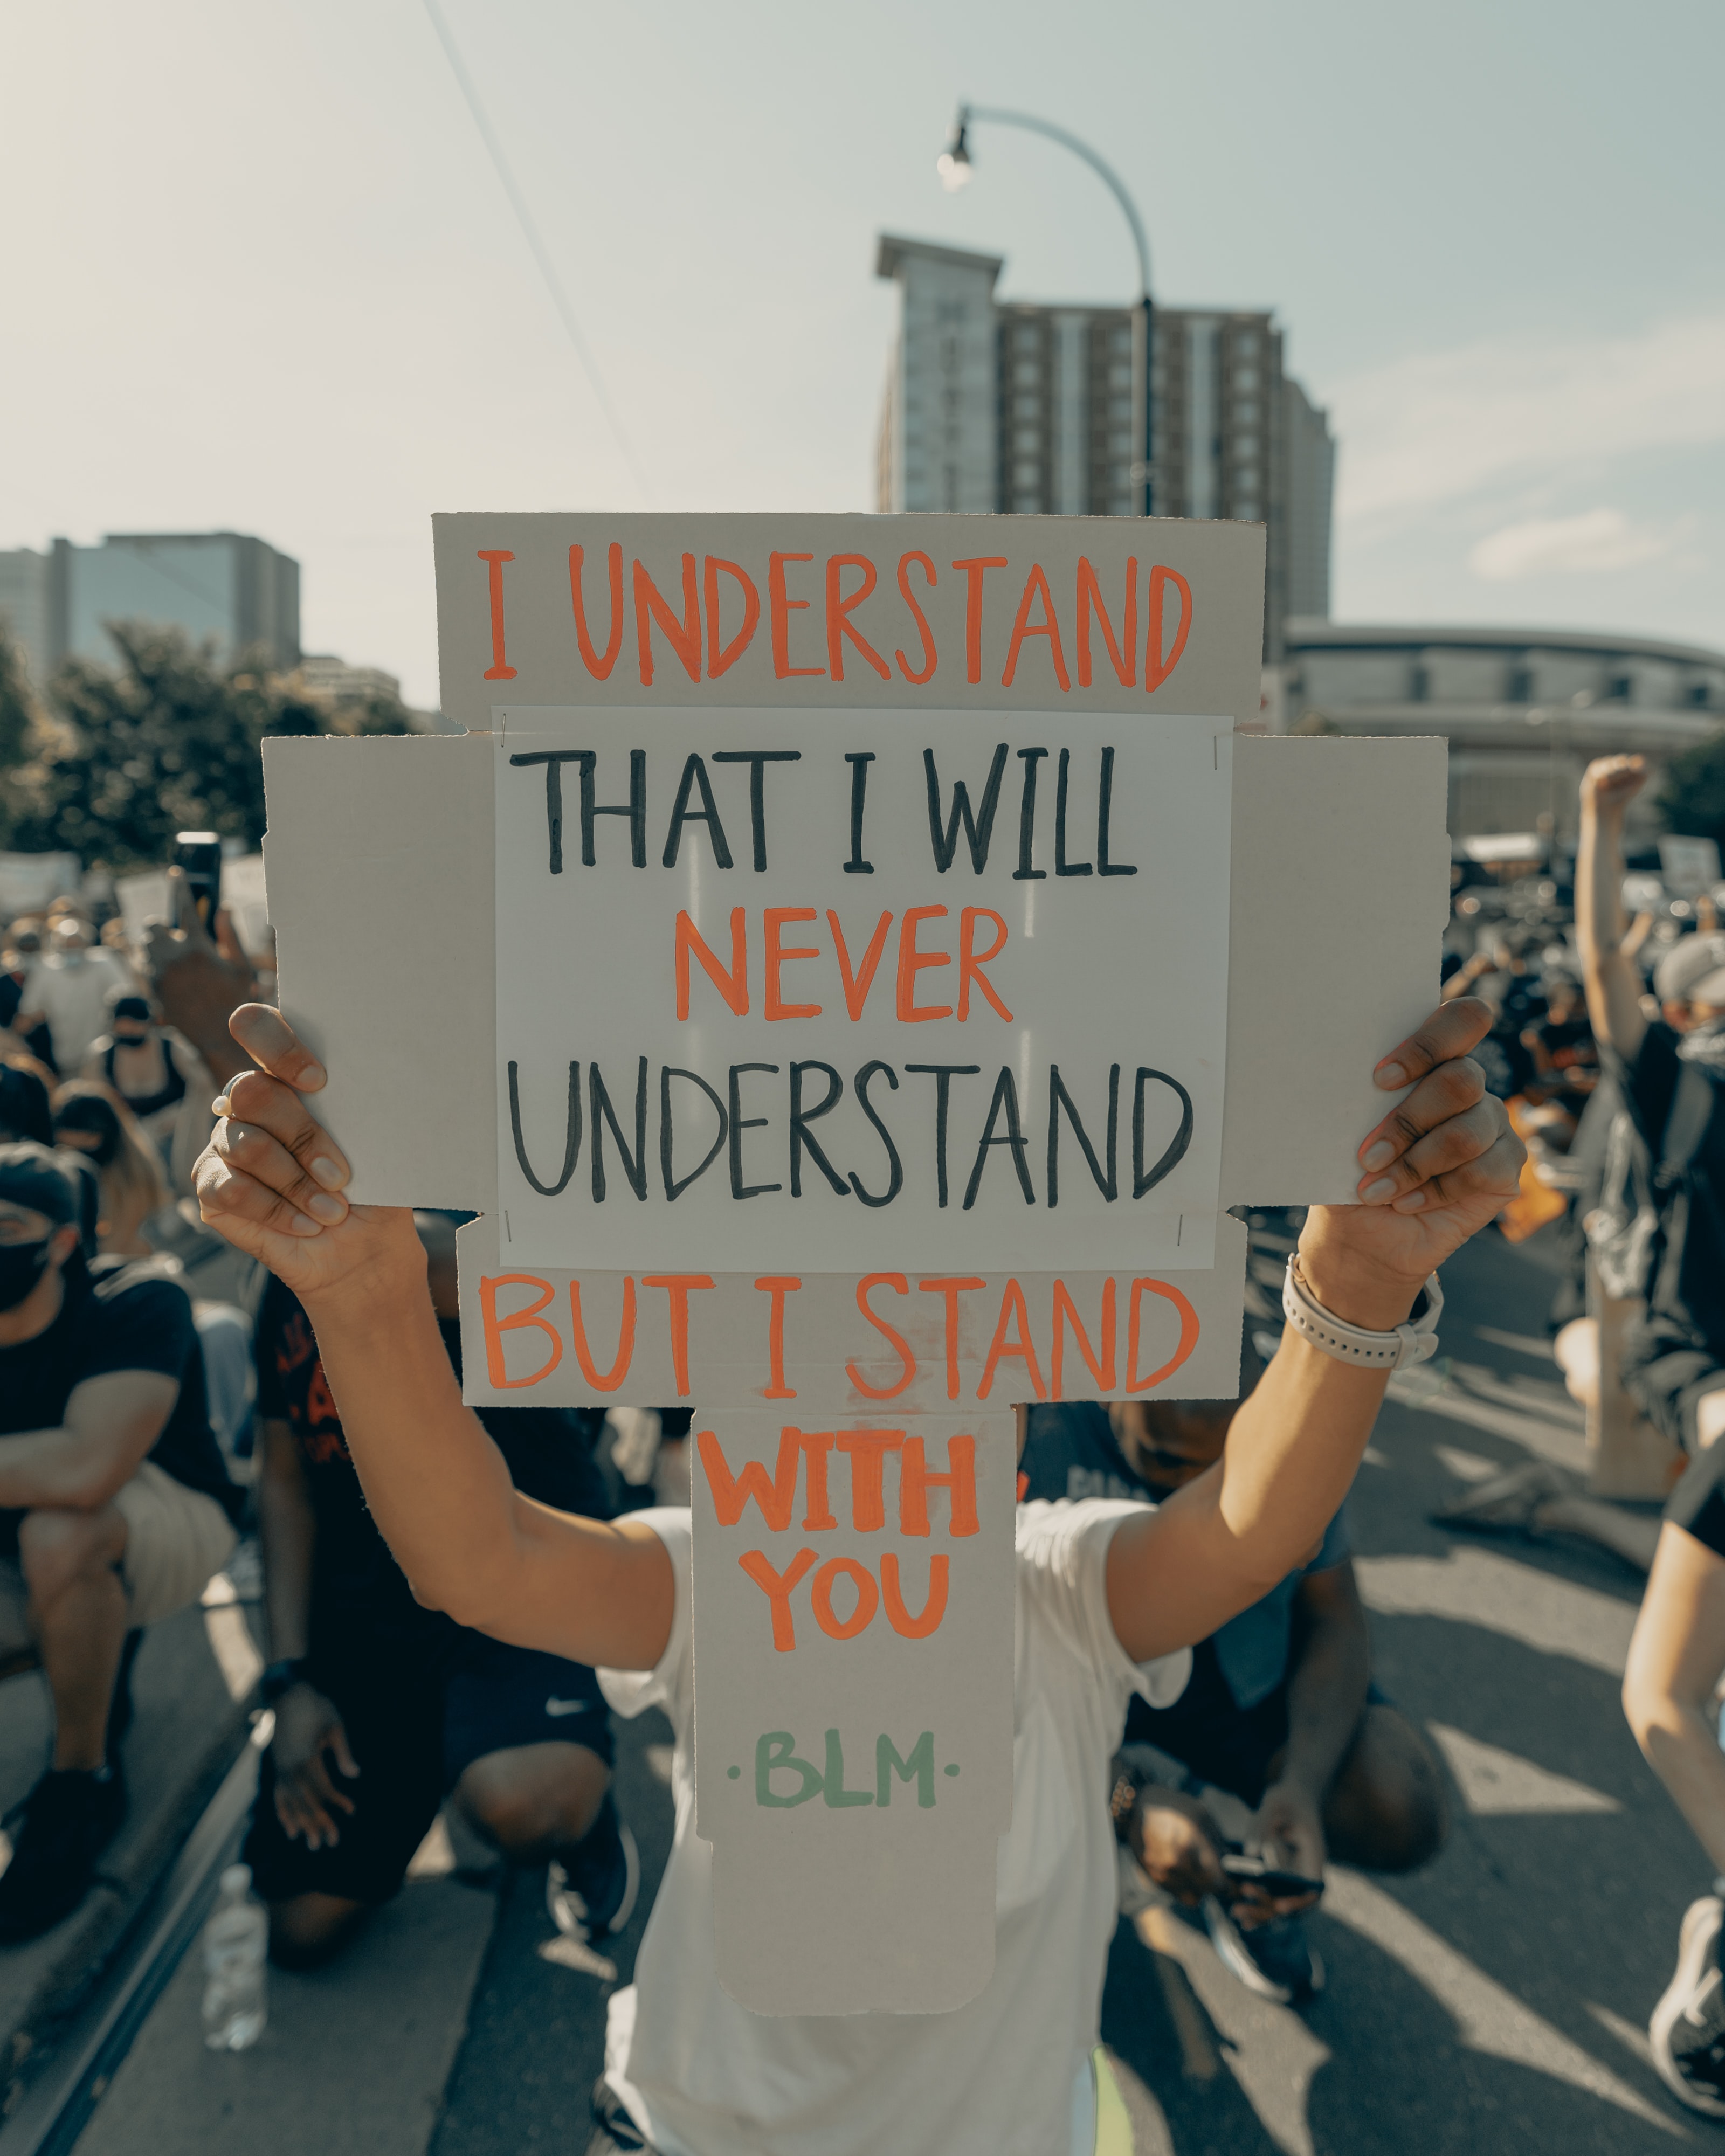 A white person holding a protest sign that says, " I understand that I will never understand, but I stand with you. #BLM"